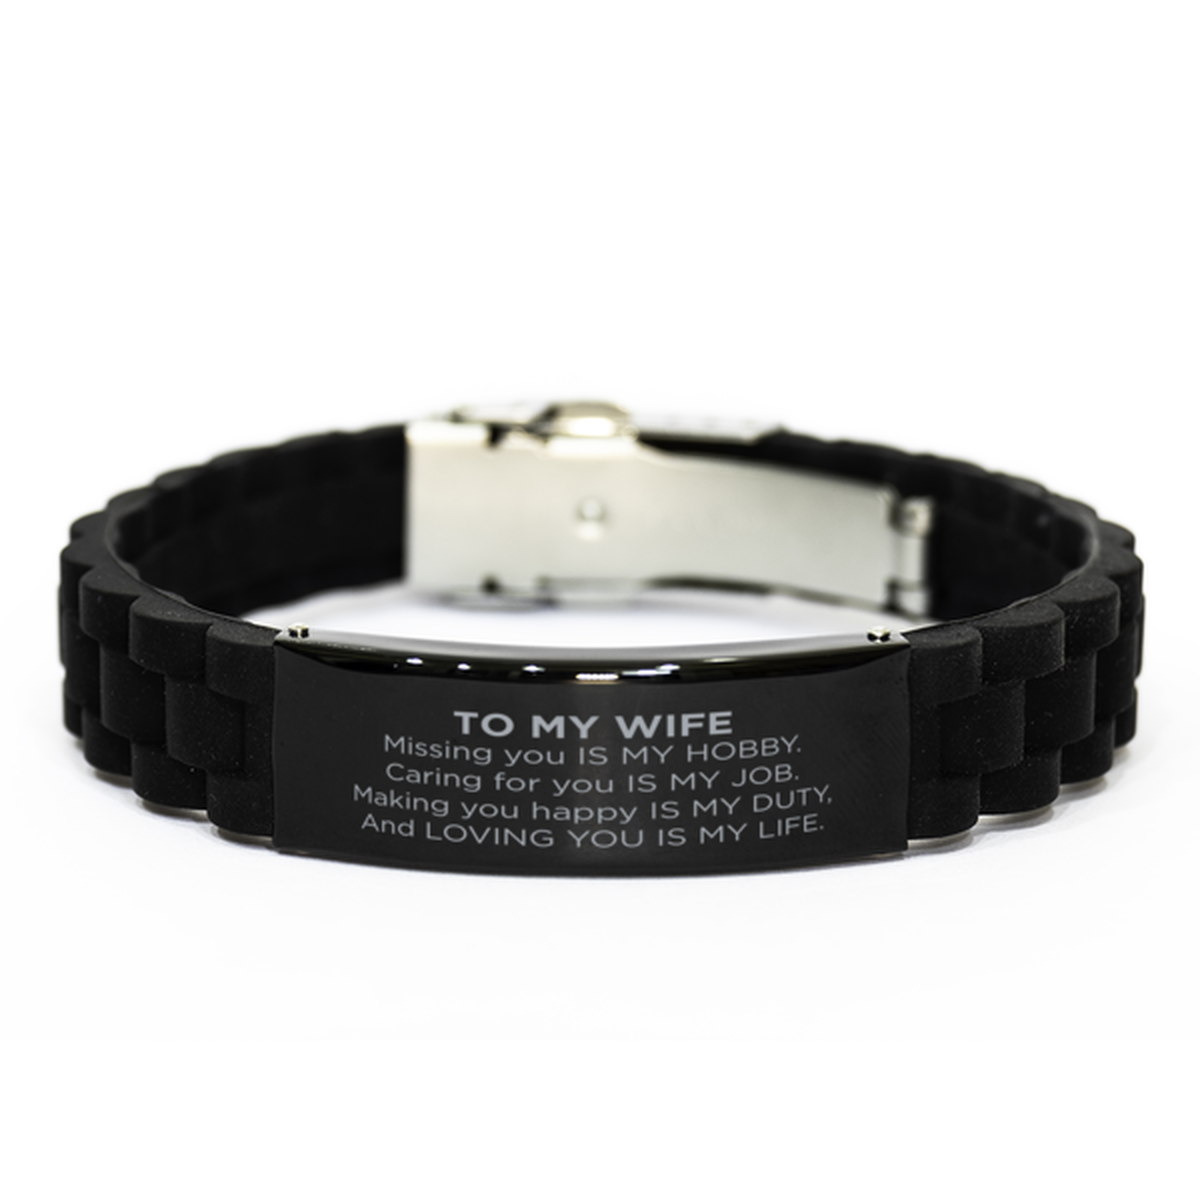 To My Wife Black Bracelet, Loving You Is My Life, Birthday Gifts For Wife From Husband, Valentines Gifts For Women